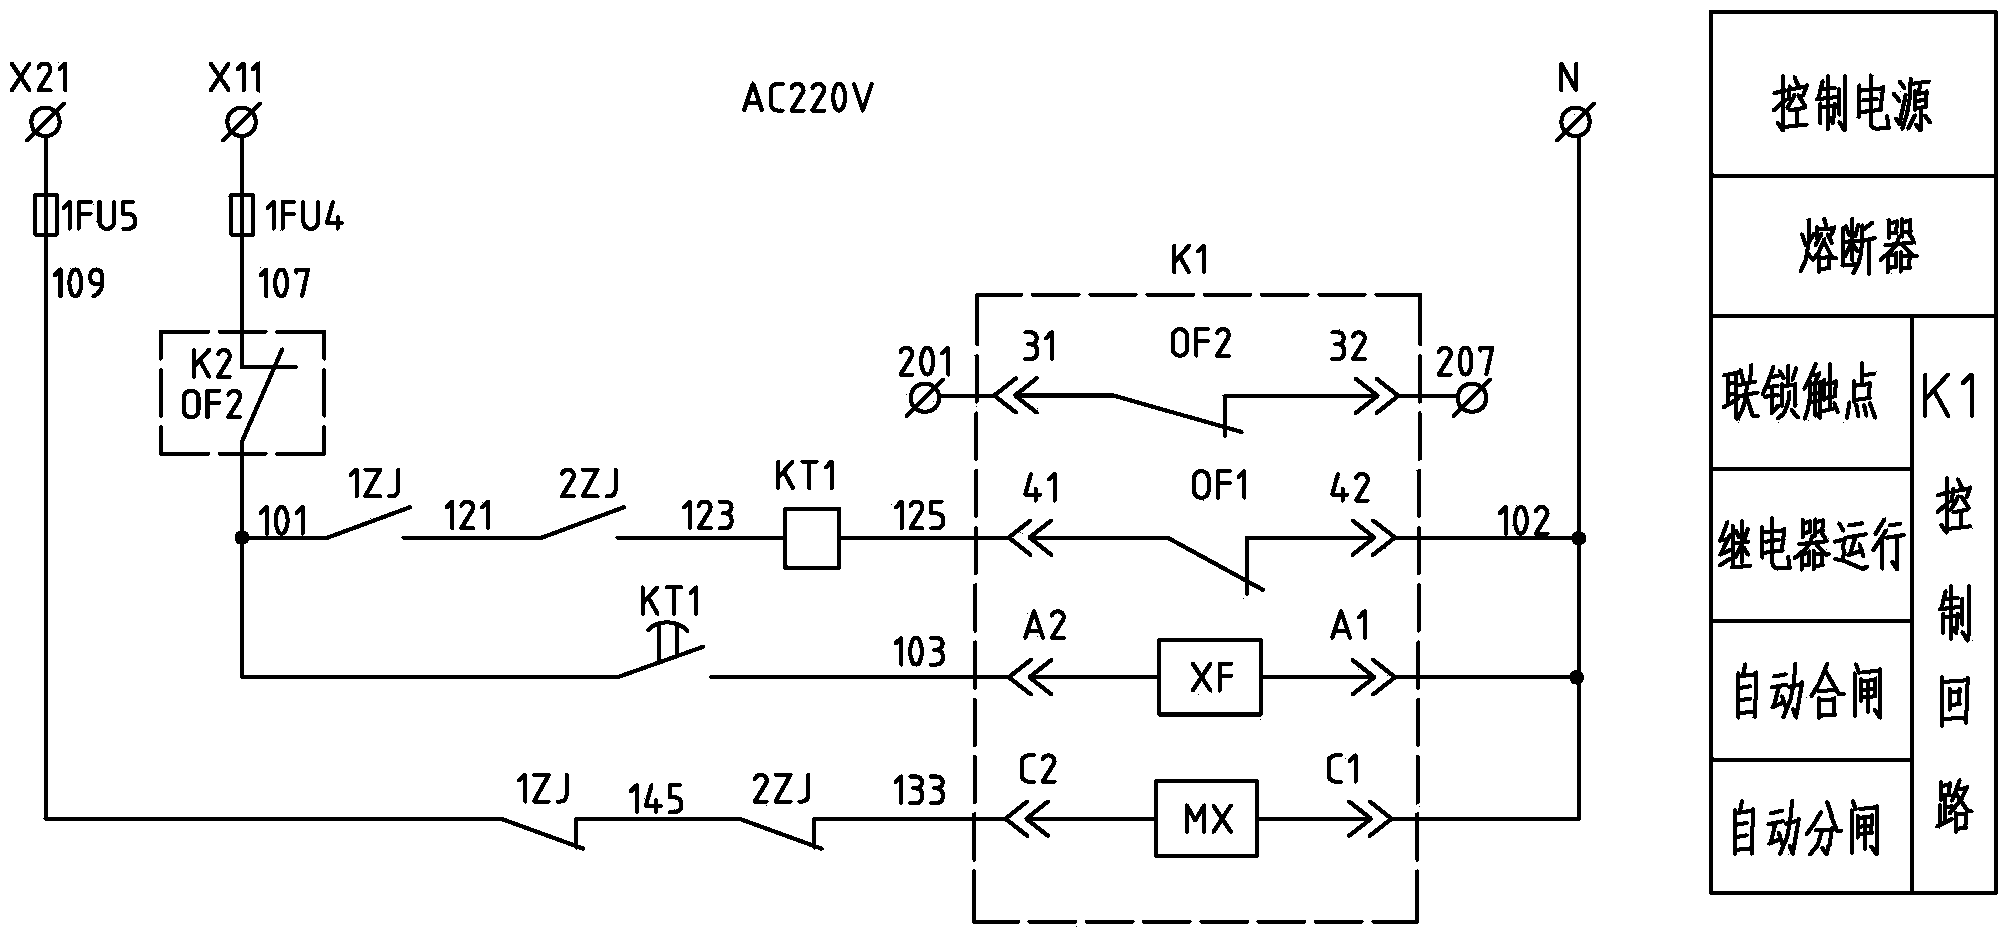 Auto-putting-in and auto-recovering power supply system